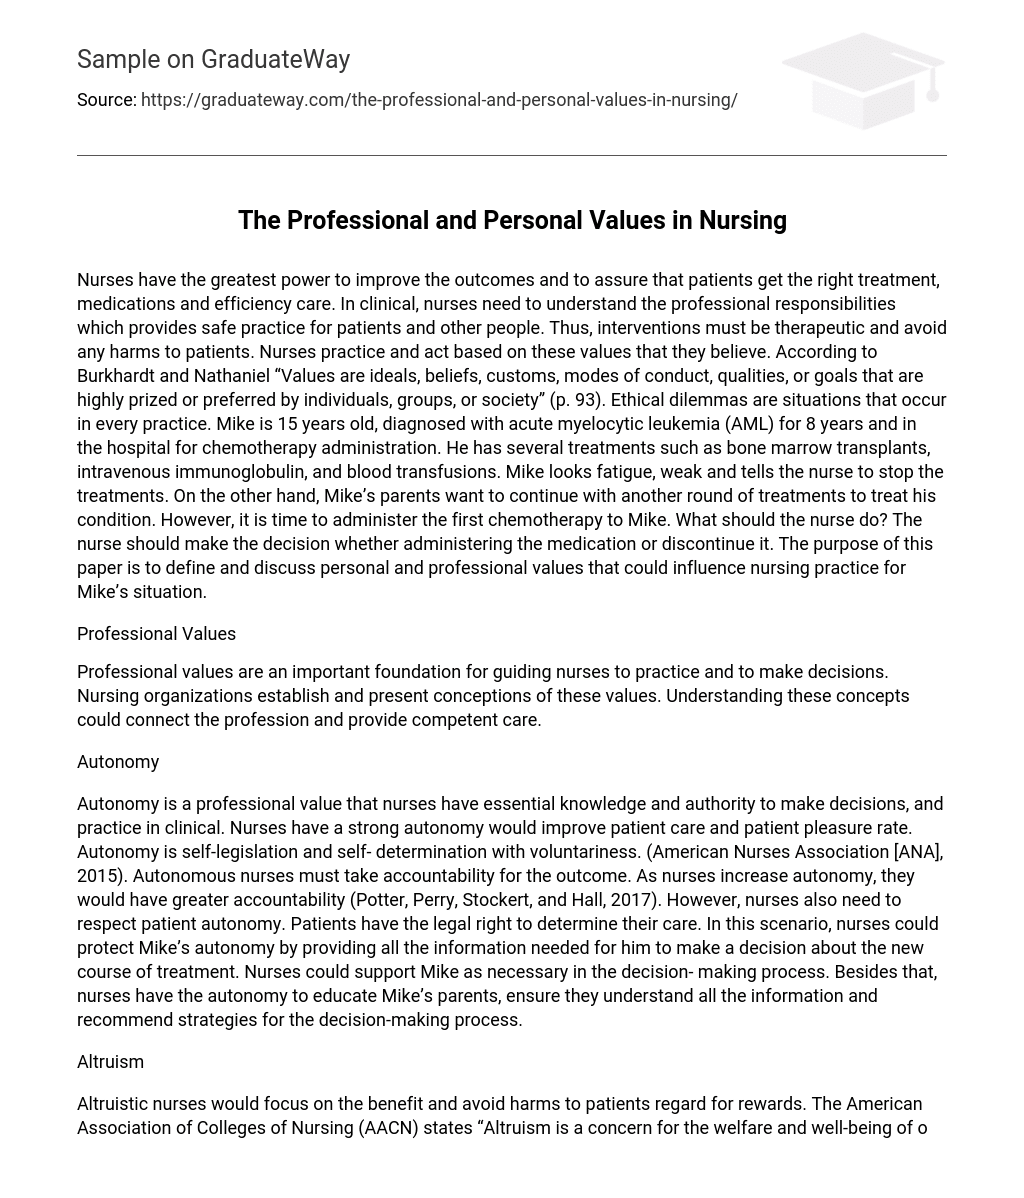 The Professional and Personal Values in Nursing